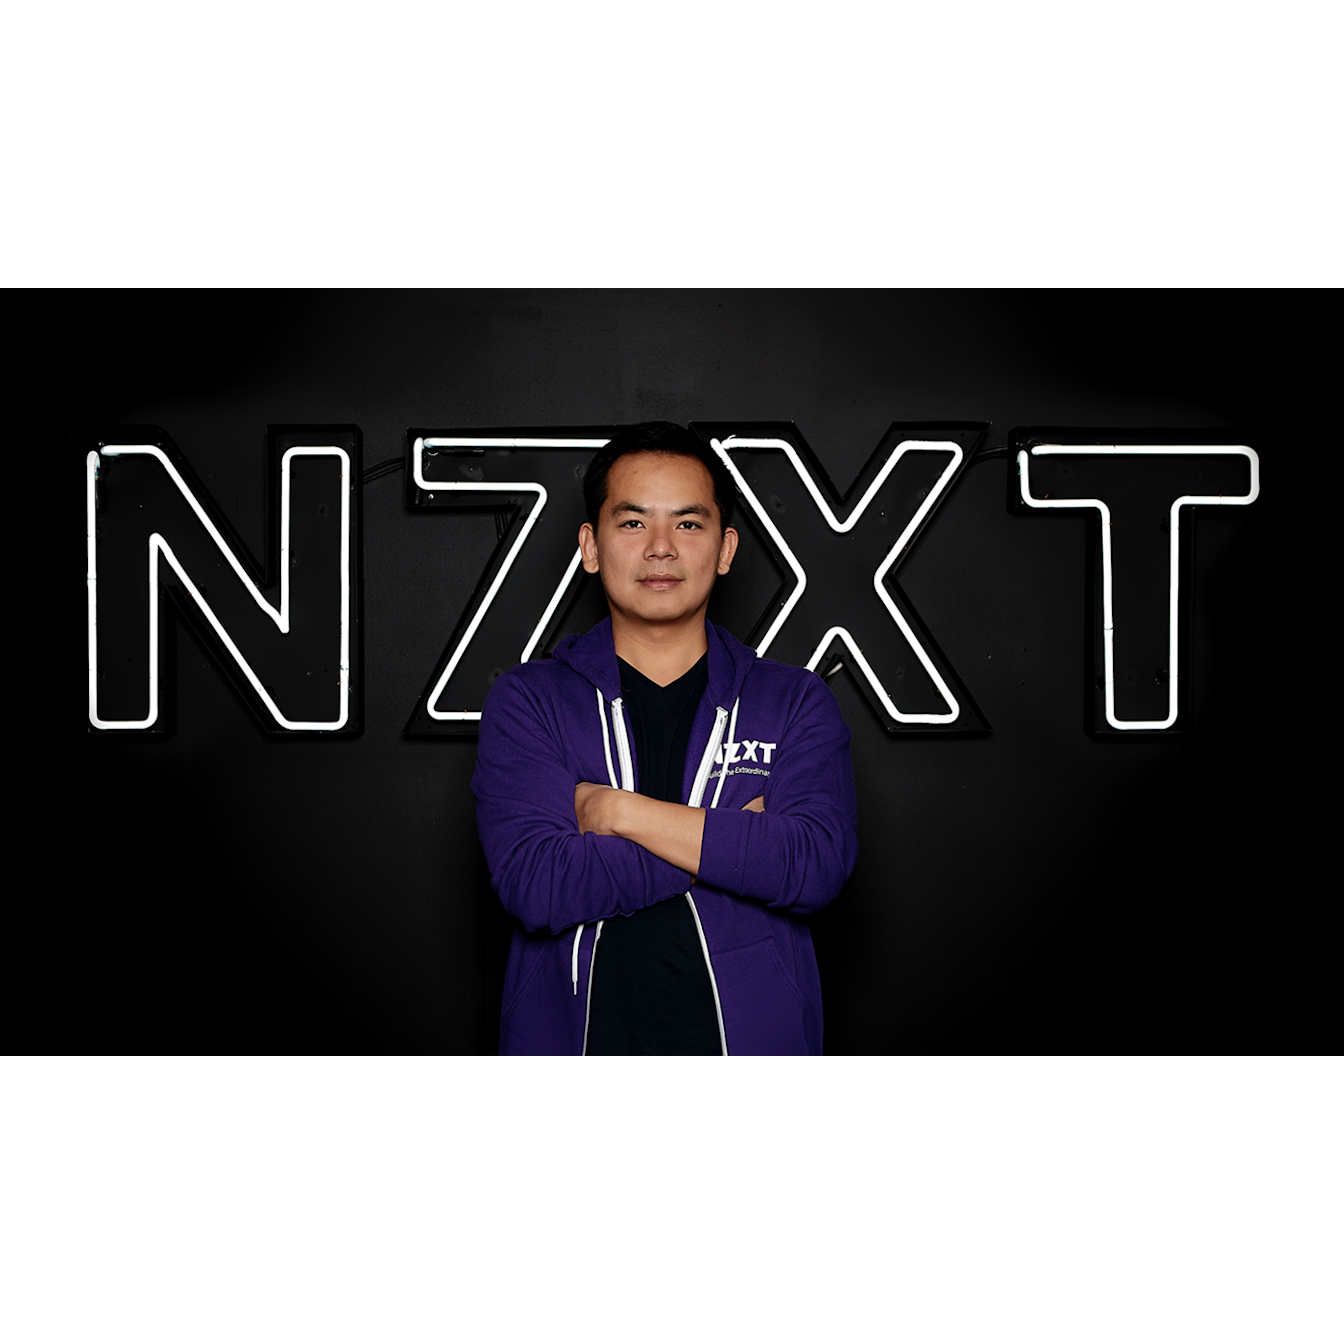 NZXT CEO